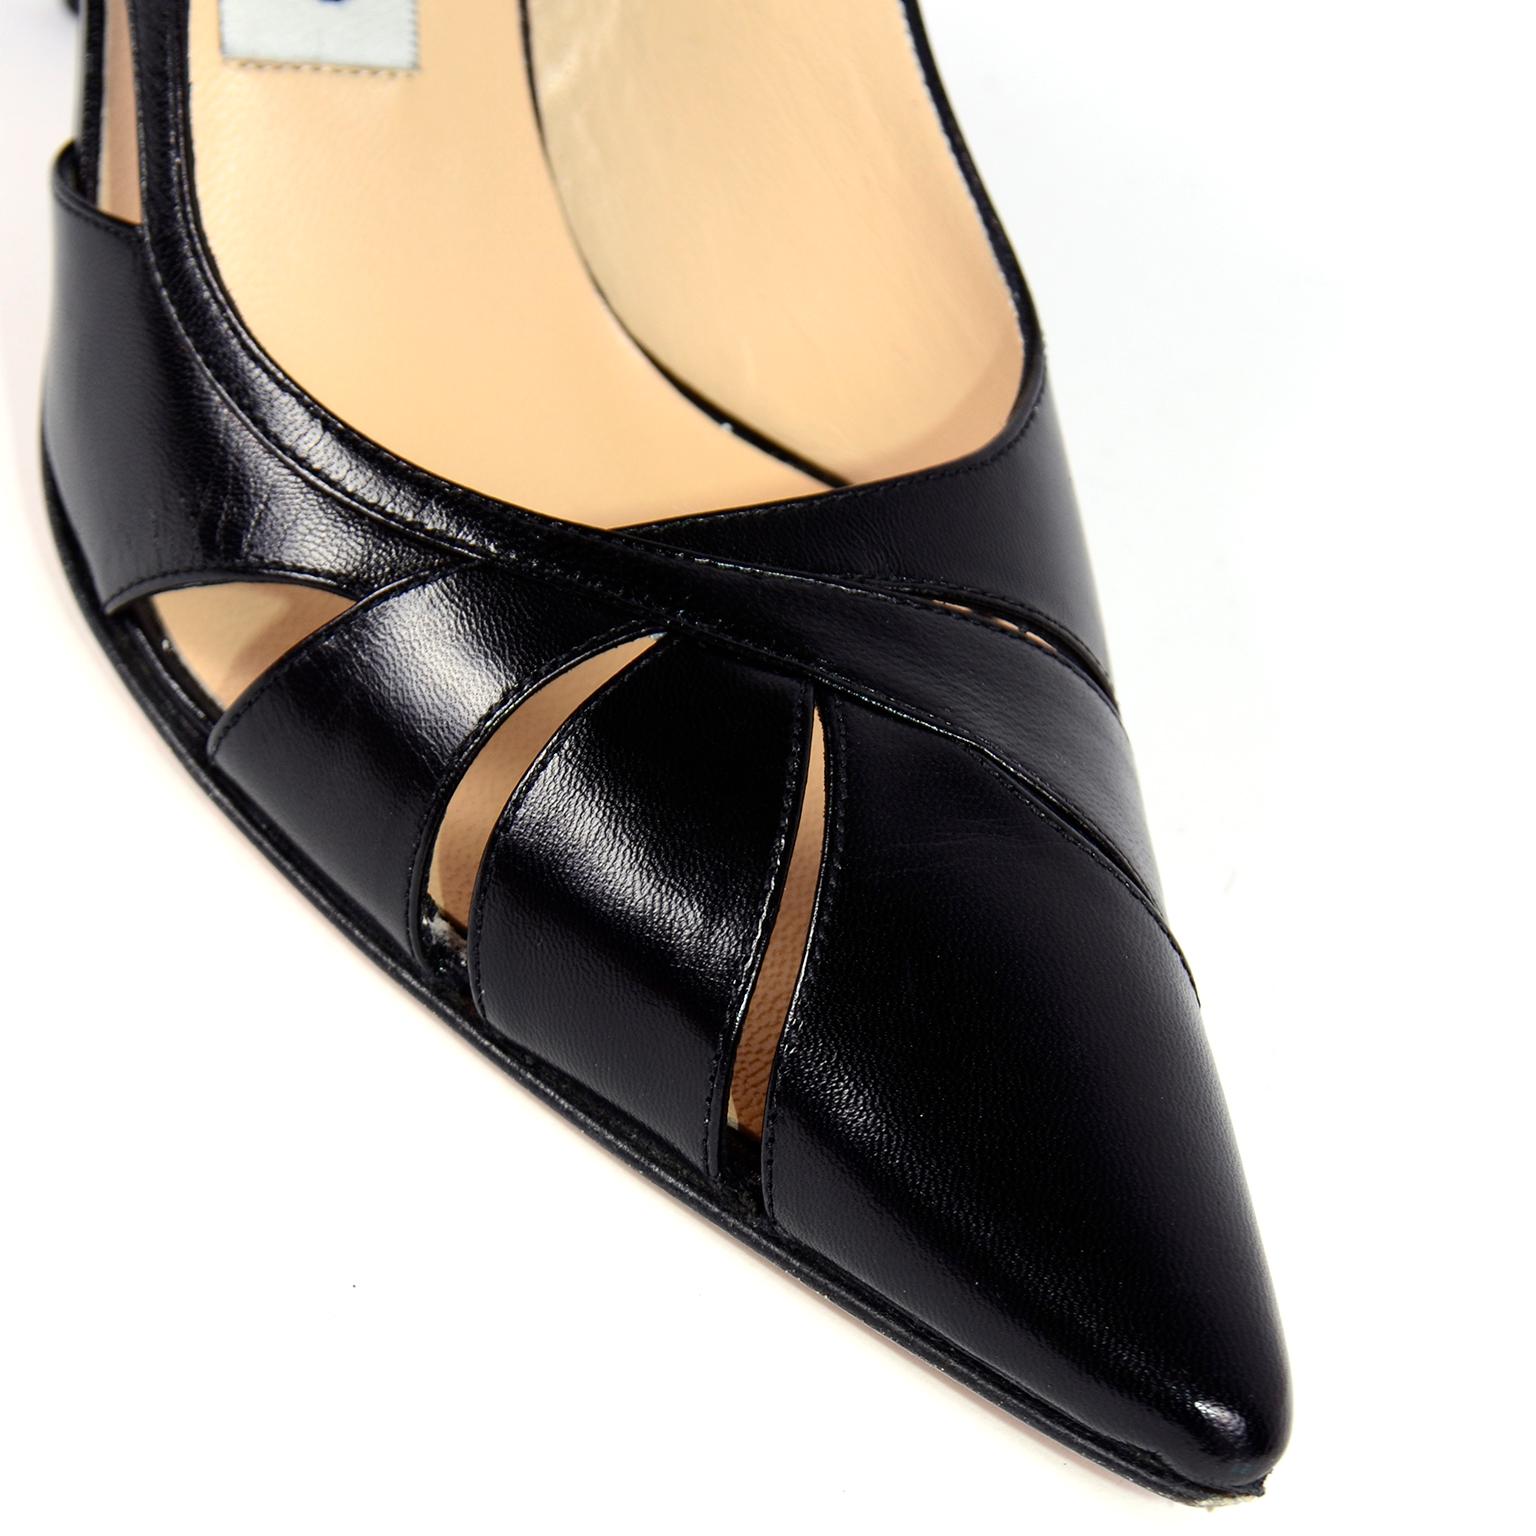 Jimmy Choo Black Cutout Slingback Pointed Toe Shoes With Original Box For Sale 1